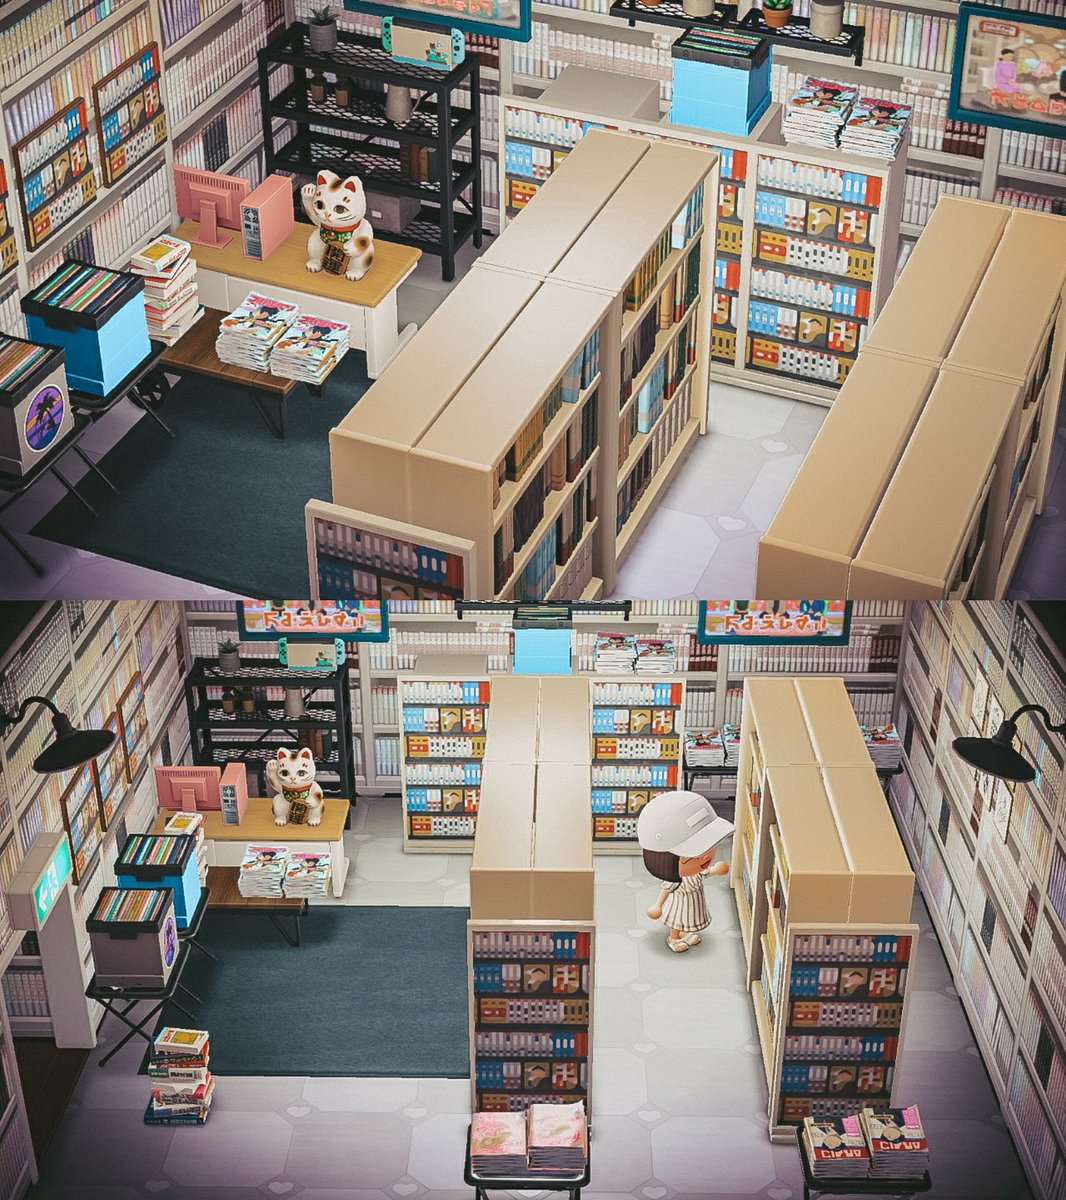 224. Une bibliothèque (Source :  https://www.reddit.com/r/AnimalCrossing/comments/hukbcw/come_on_in_and_enjoy_some_comics/)